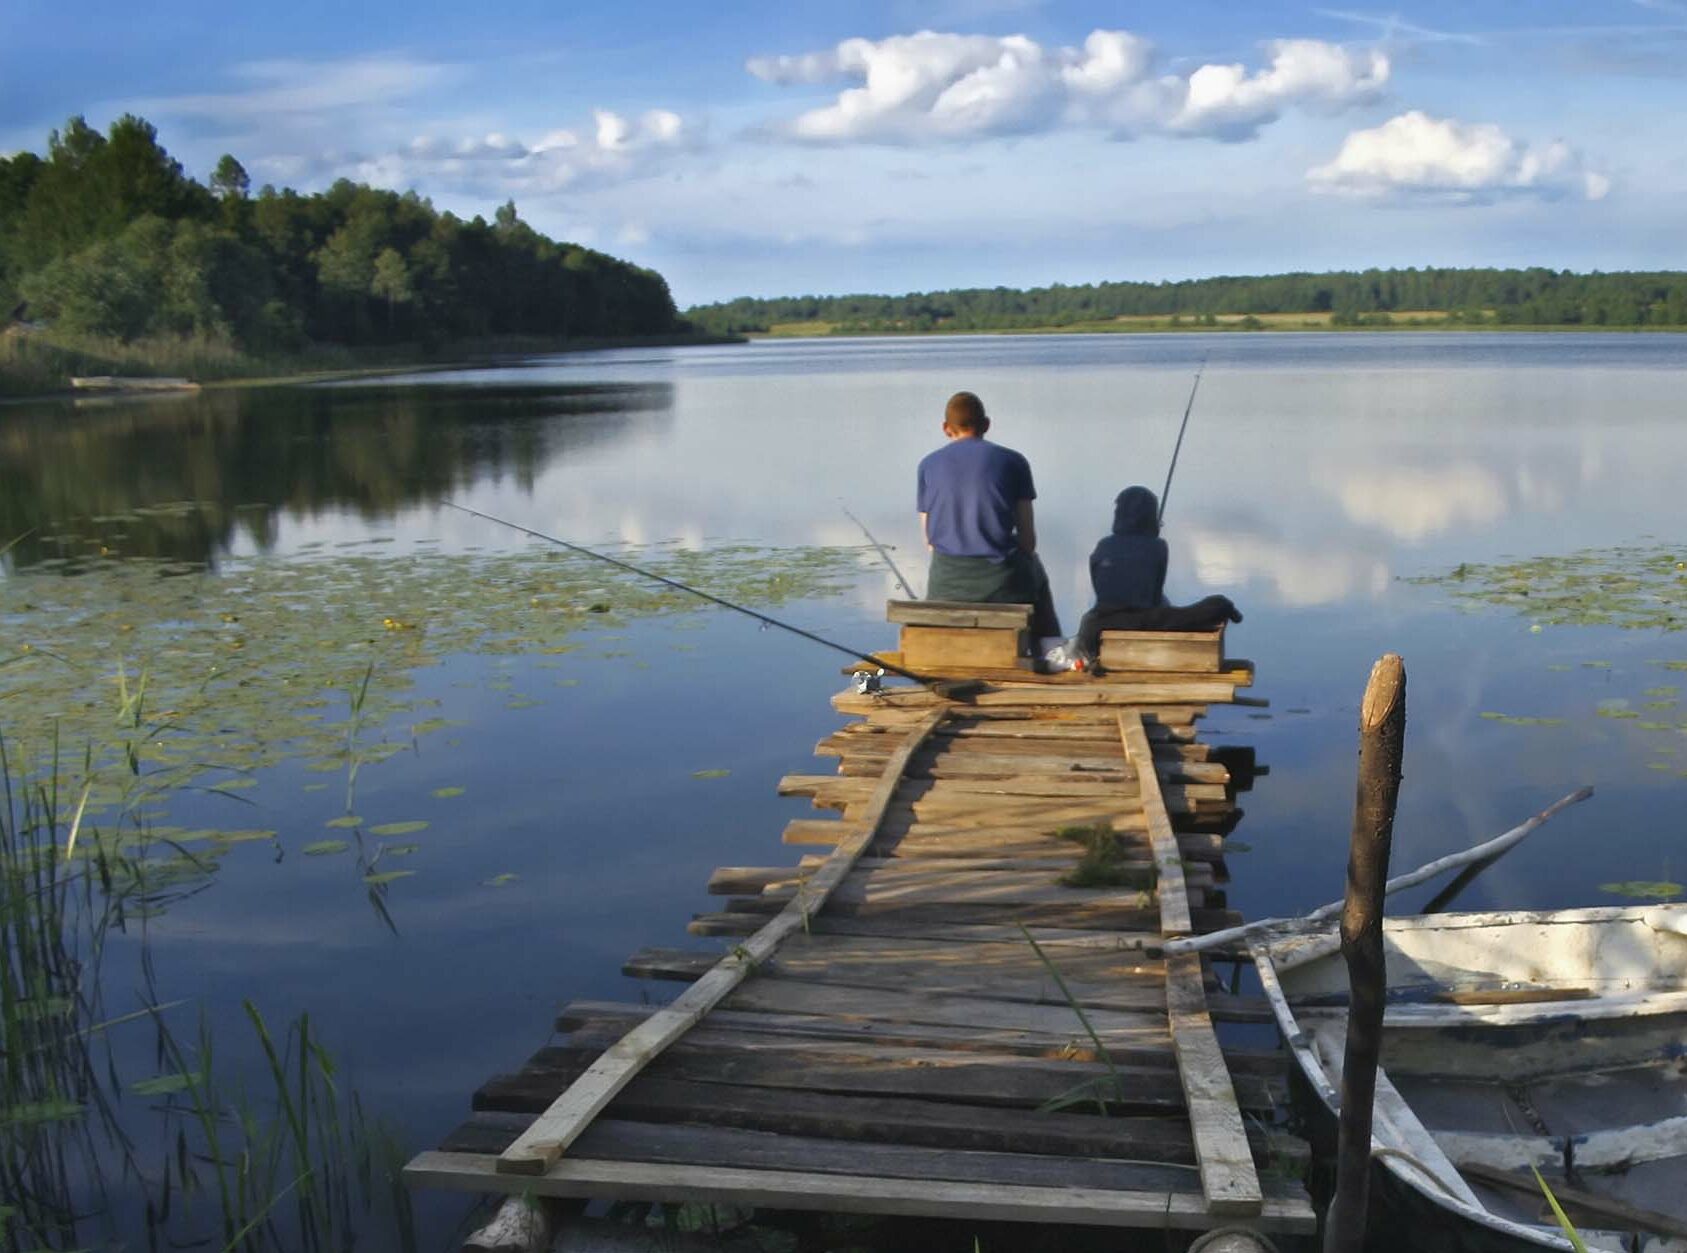 Two people fishing at the end of an old dock